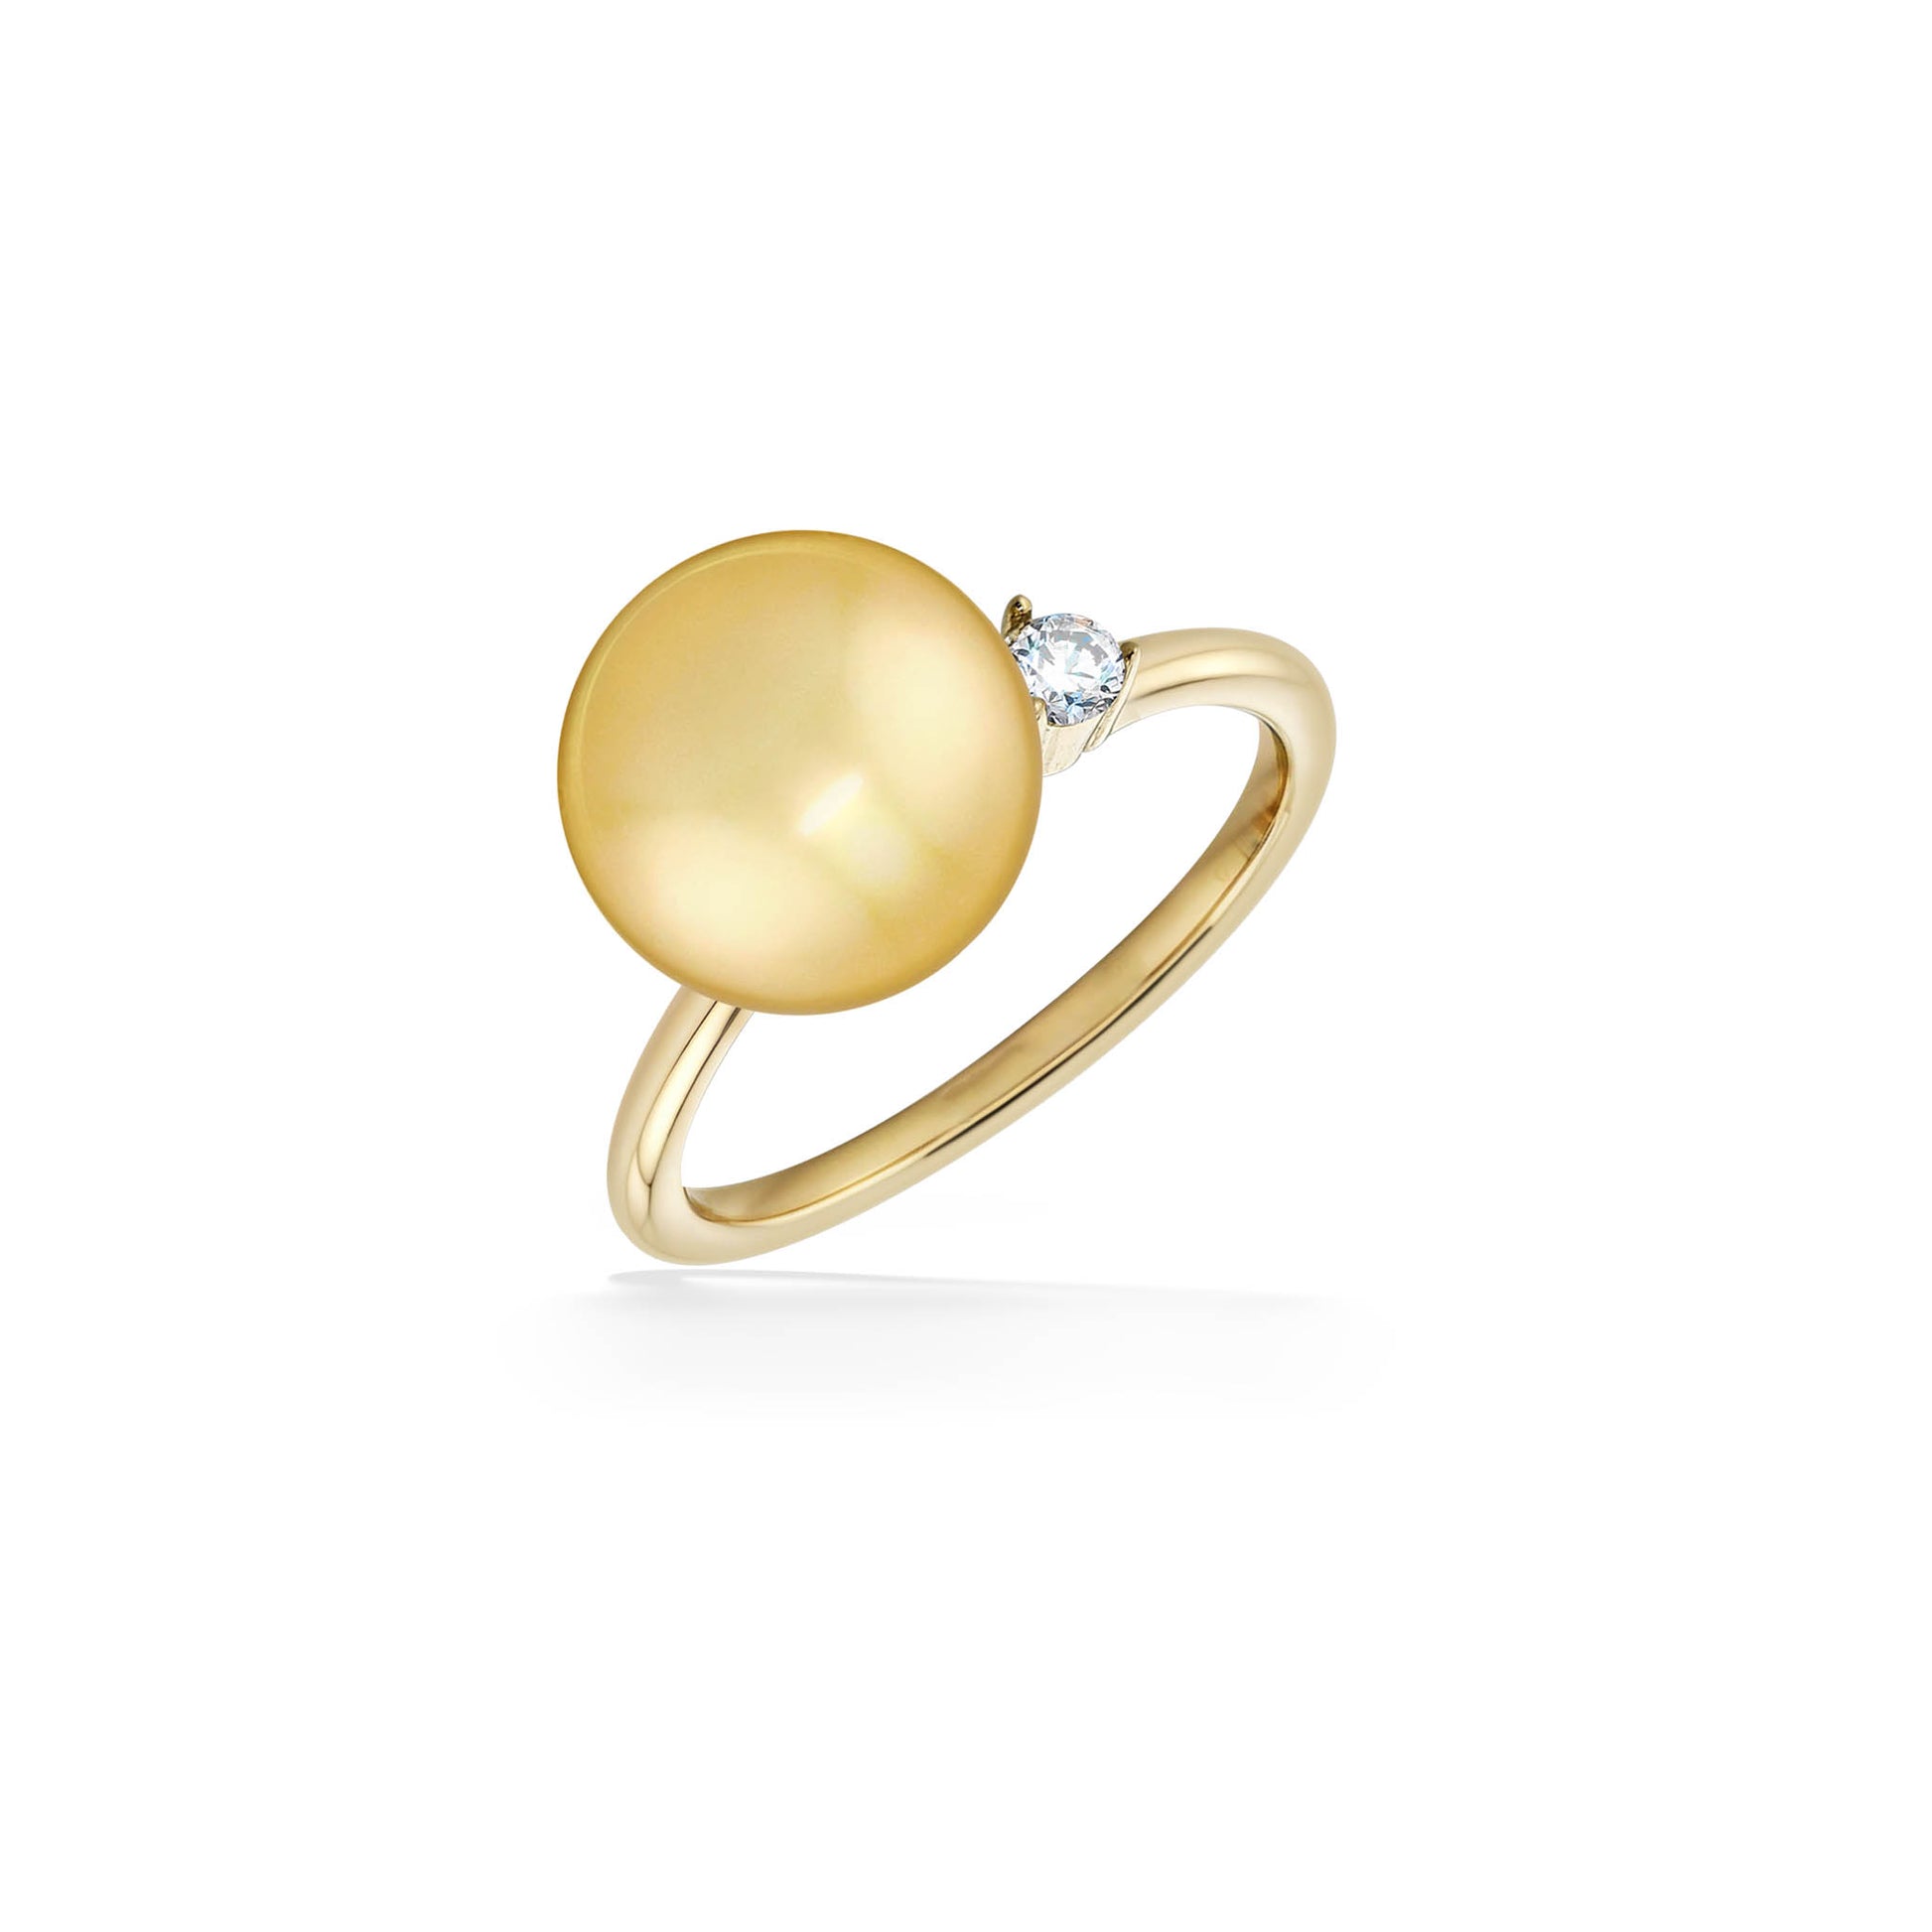 44616 - 14K Yellow Gold - Golden South Sea Pearl Ring